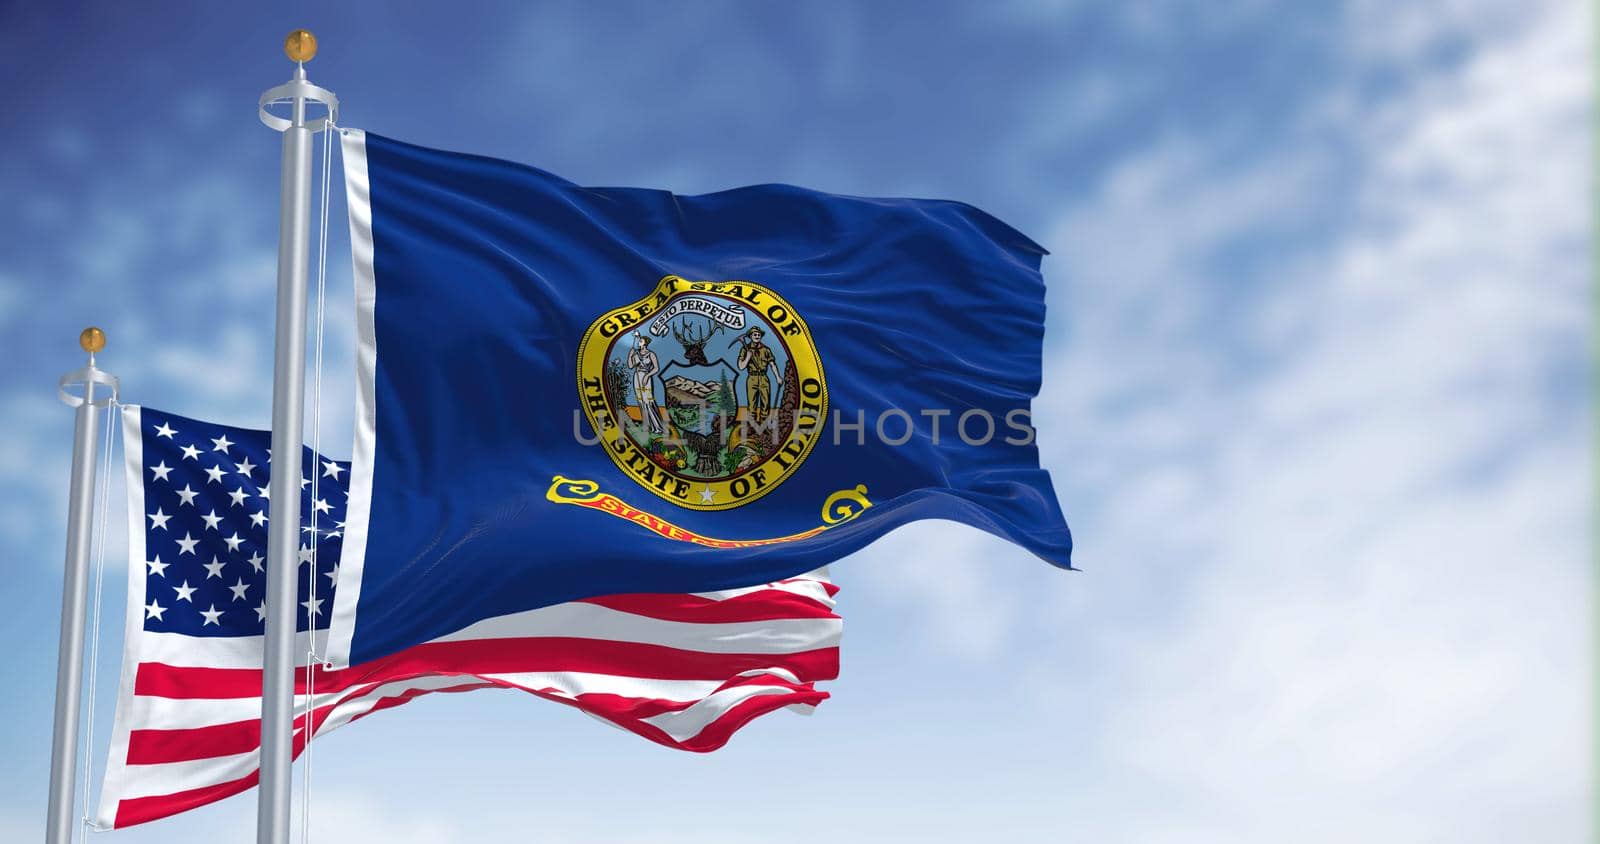 The Idaho state flag waving along with the national flag of the United States of America by rarrarorro